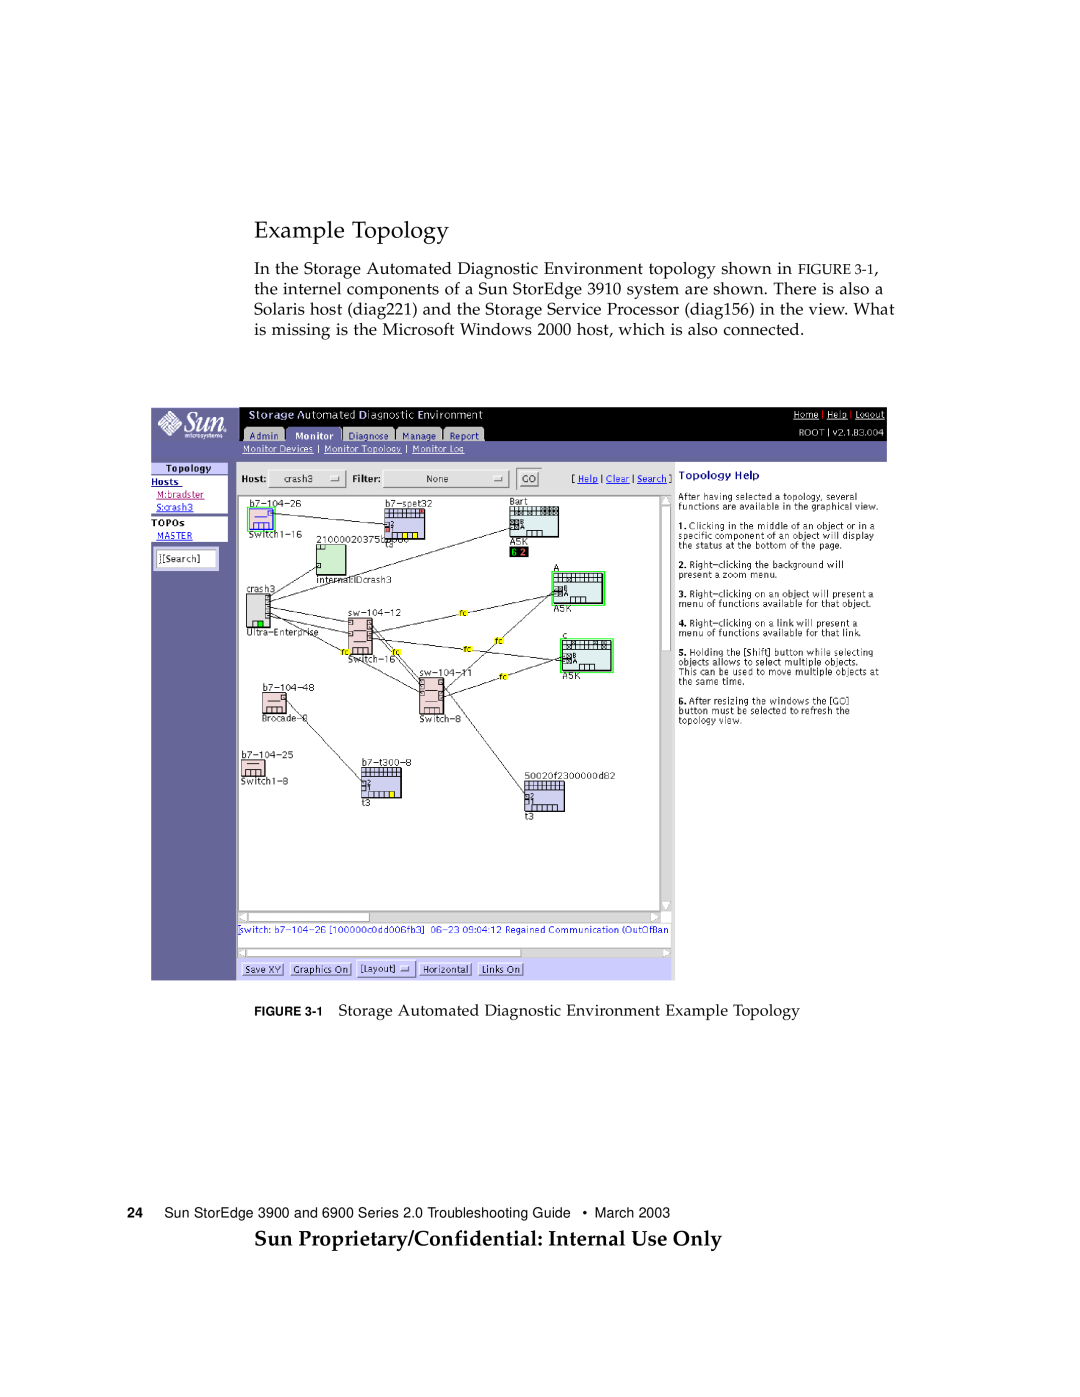 Sun Microsystems 3900, 6900 manual Example Topology, Sun Proprietary/Confidential Internal Use Only 